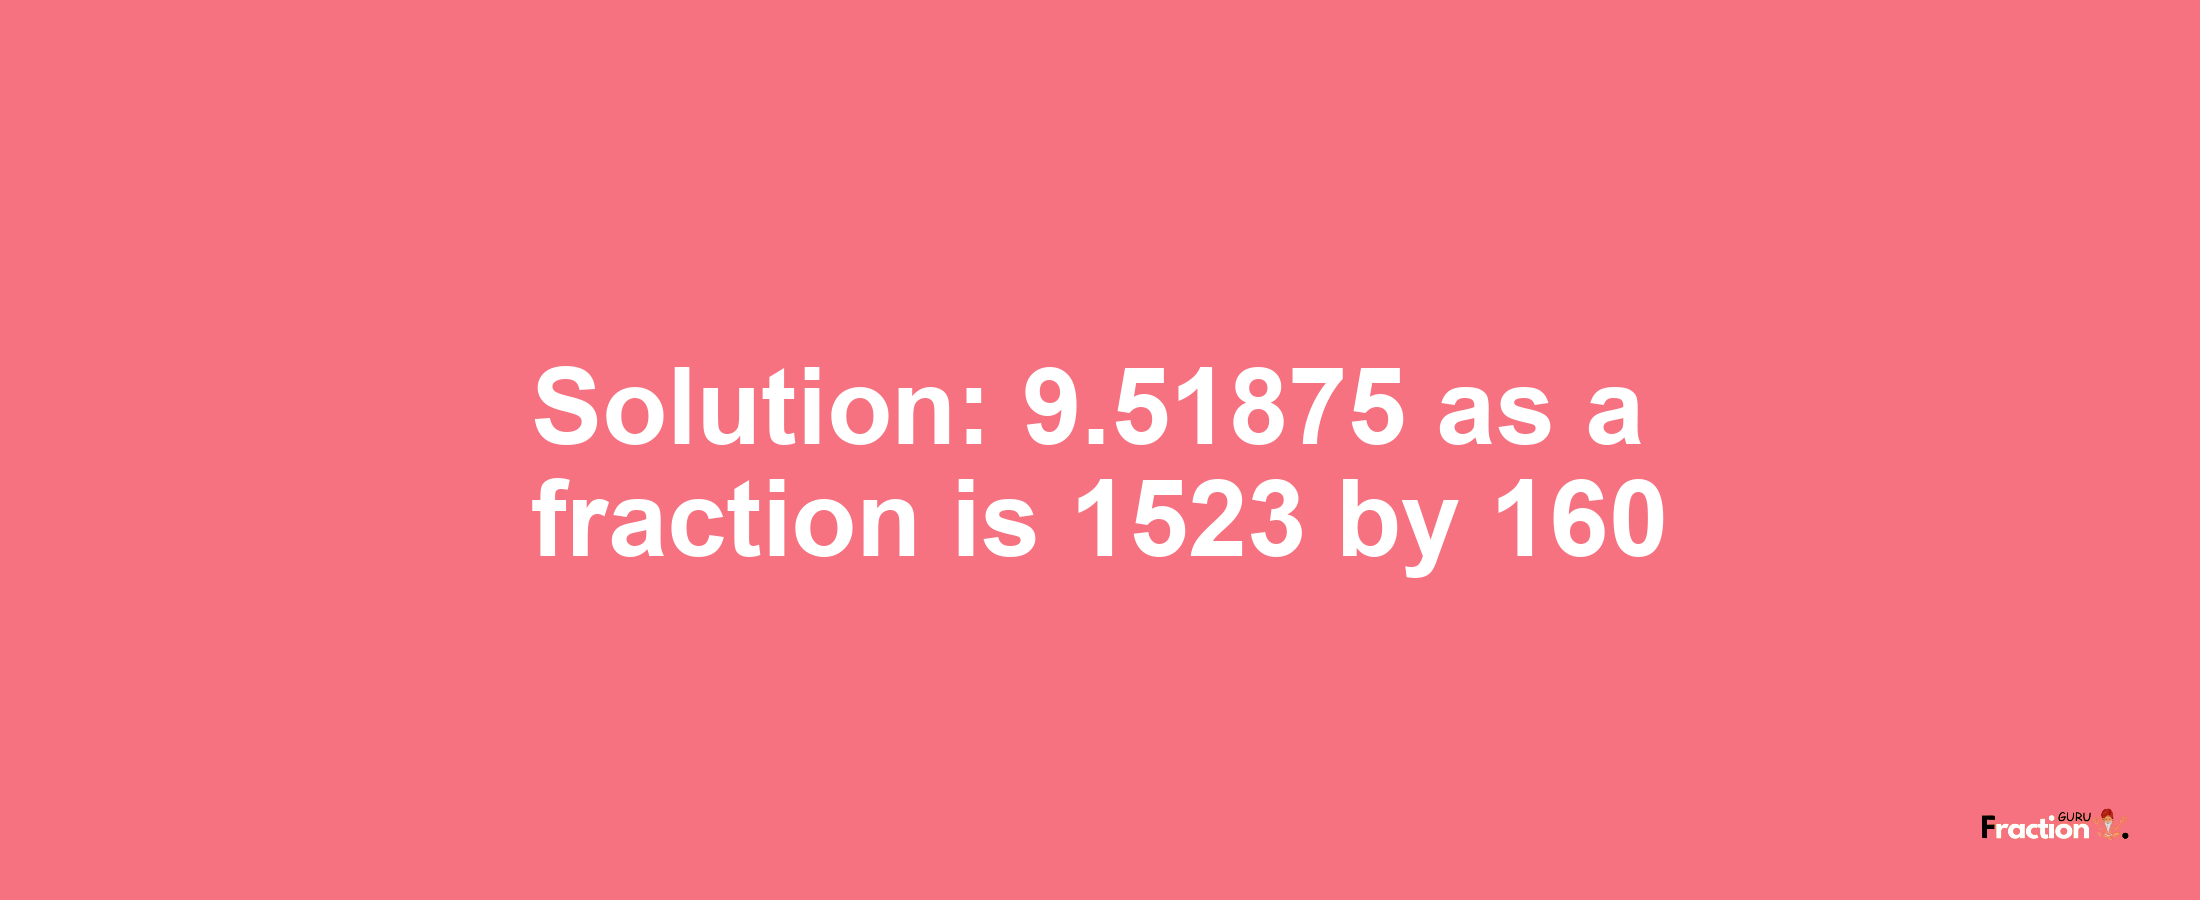 Solution:9.51875 as a fraction is 1523/160